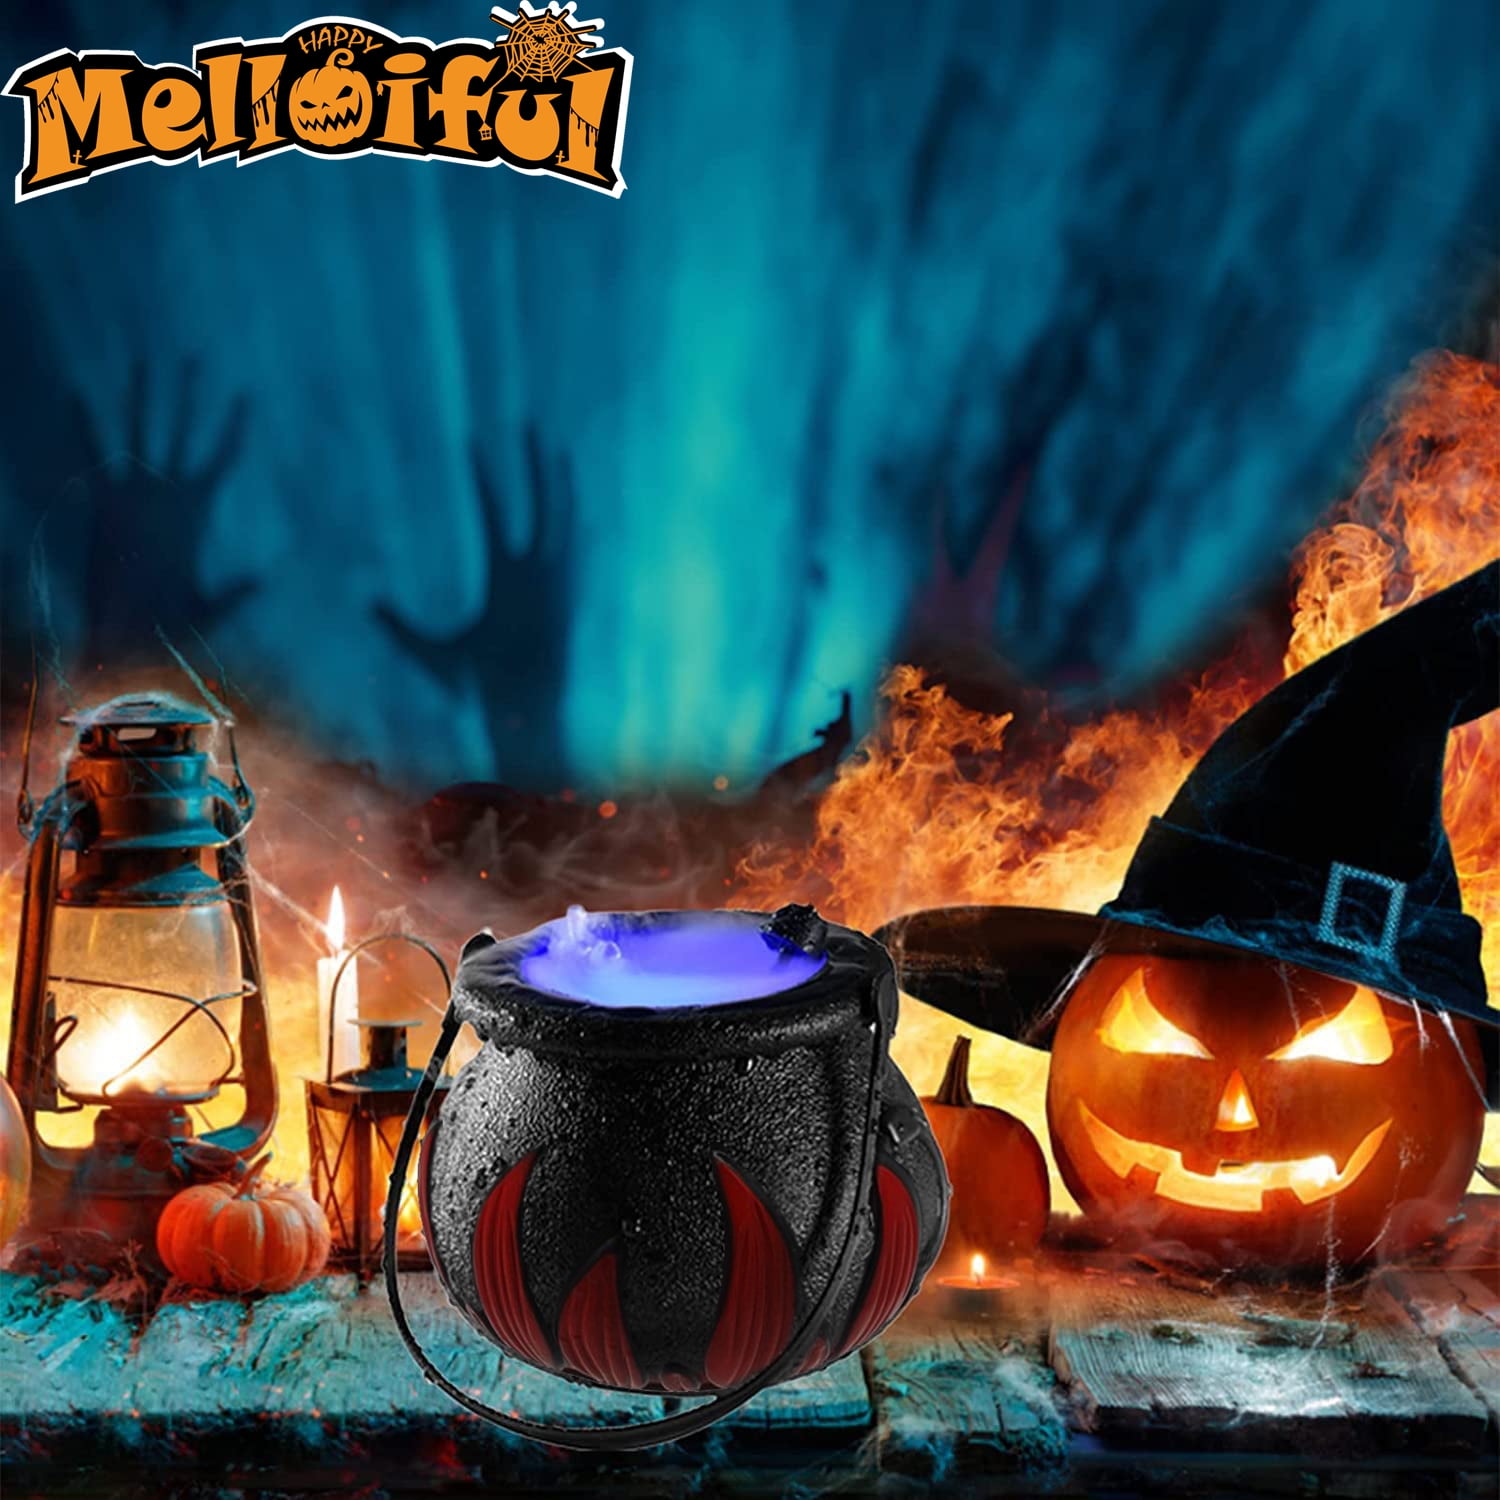 Halloween Mist Maker,Black Cauldron with Witch Jar Atomizer Lamp with 12 LED Light Color Change Fogger Mist Maker Mini Candy Cauldron Decor for Halloween Theme Party Prom Prop ABS Plastic 